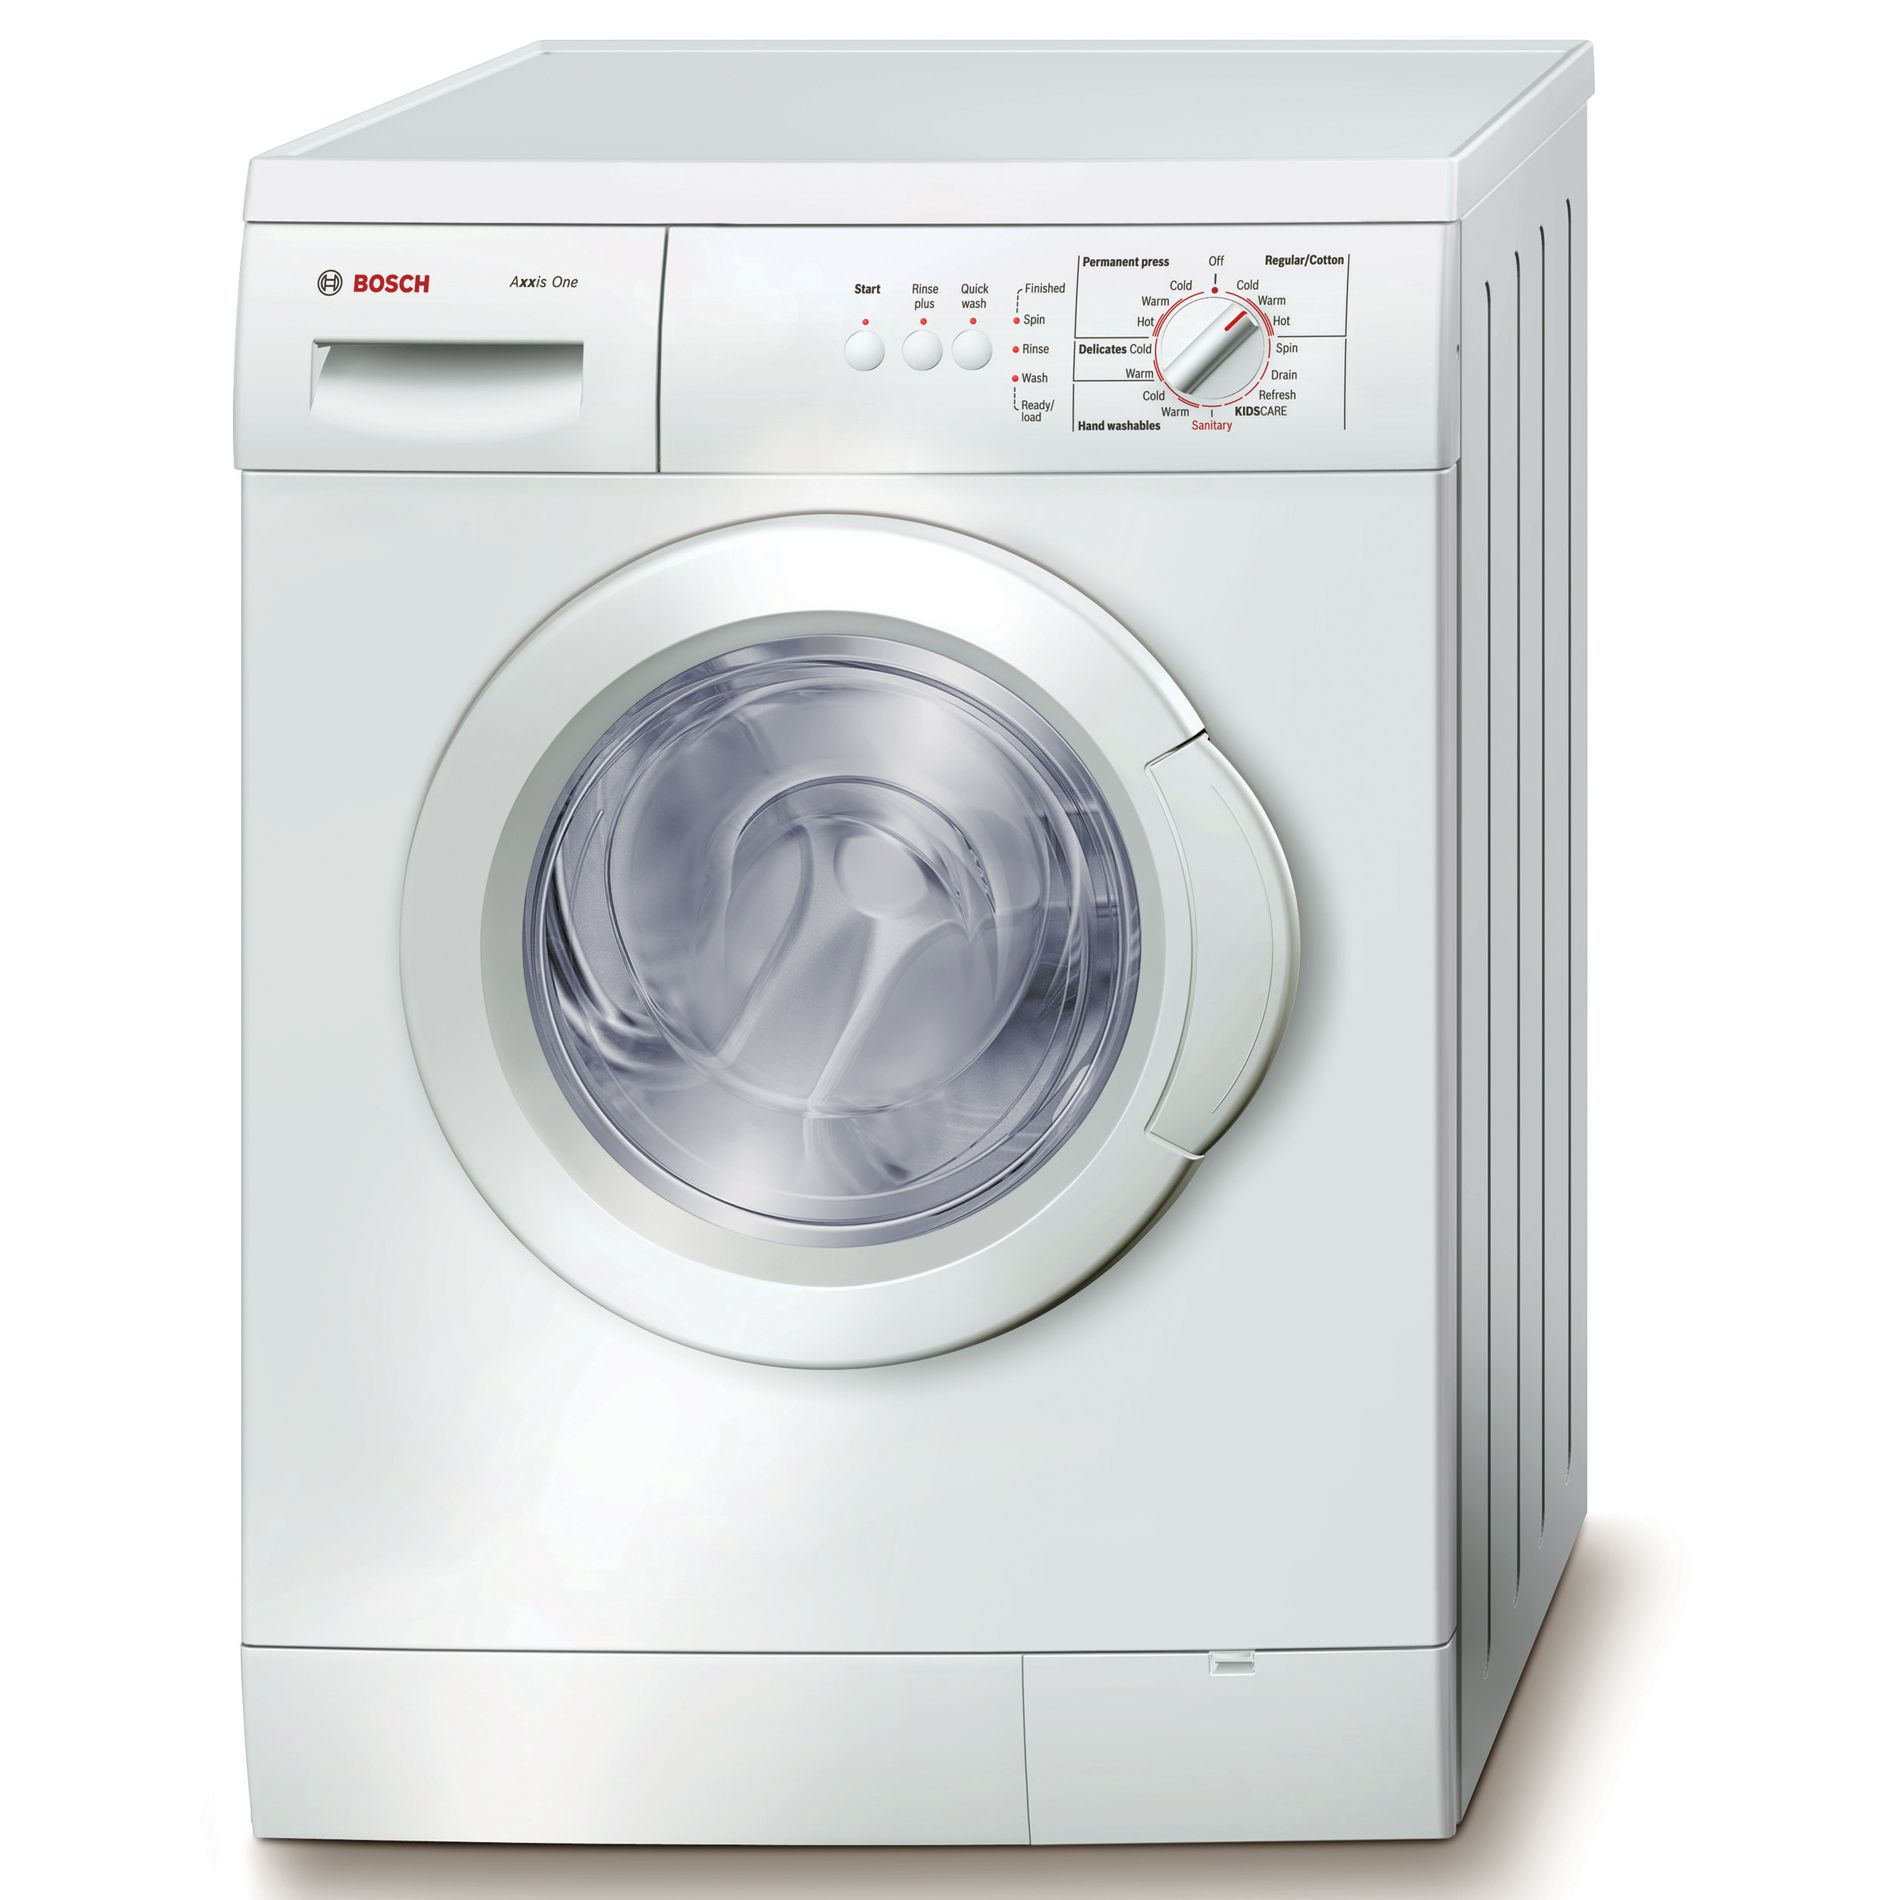 Bosch Axxis 1.9 cu. ft, Compact Front-Load Washer - White